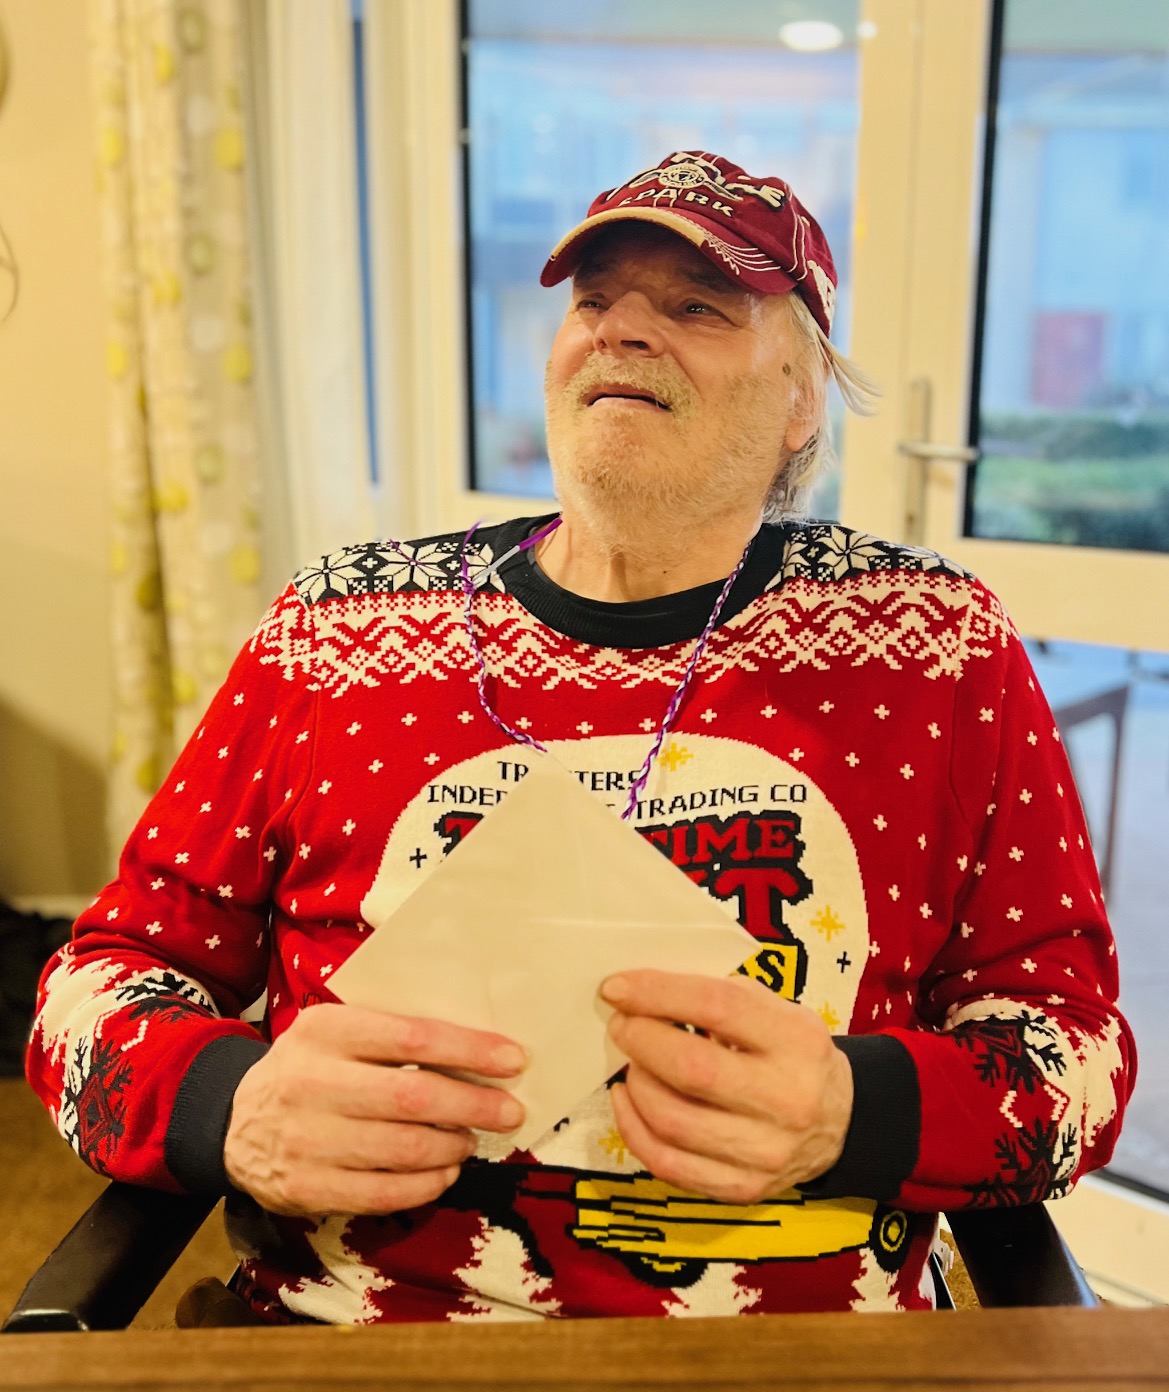 A gentleman wearing a red Christmas jumper and baseball cap, with a Christmas card in his hands